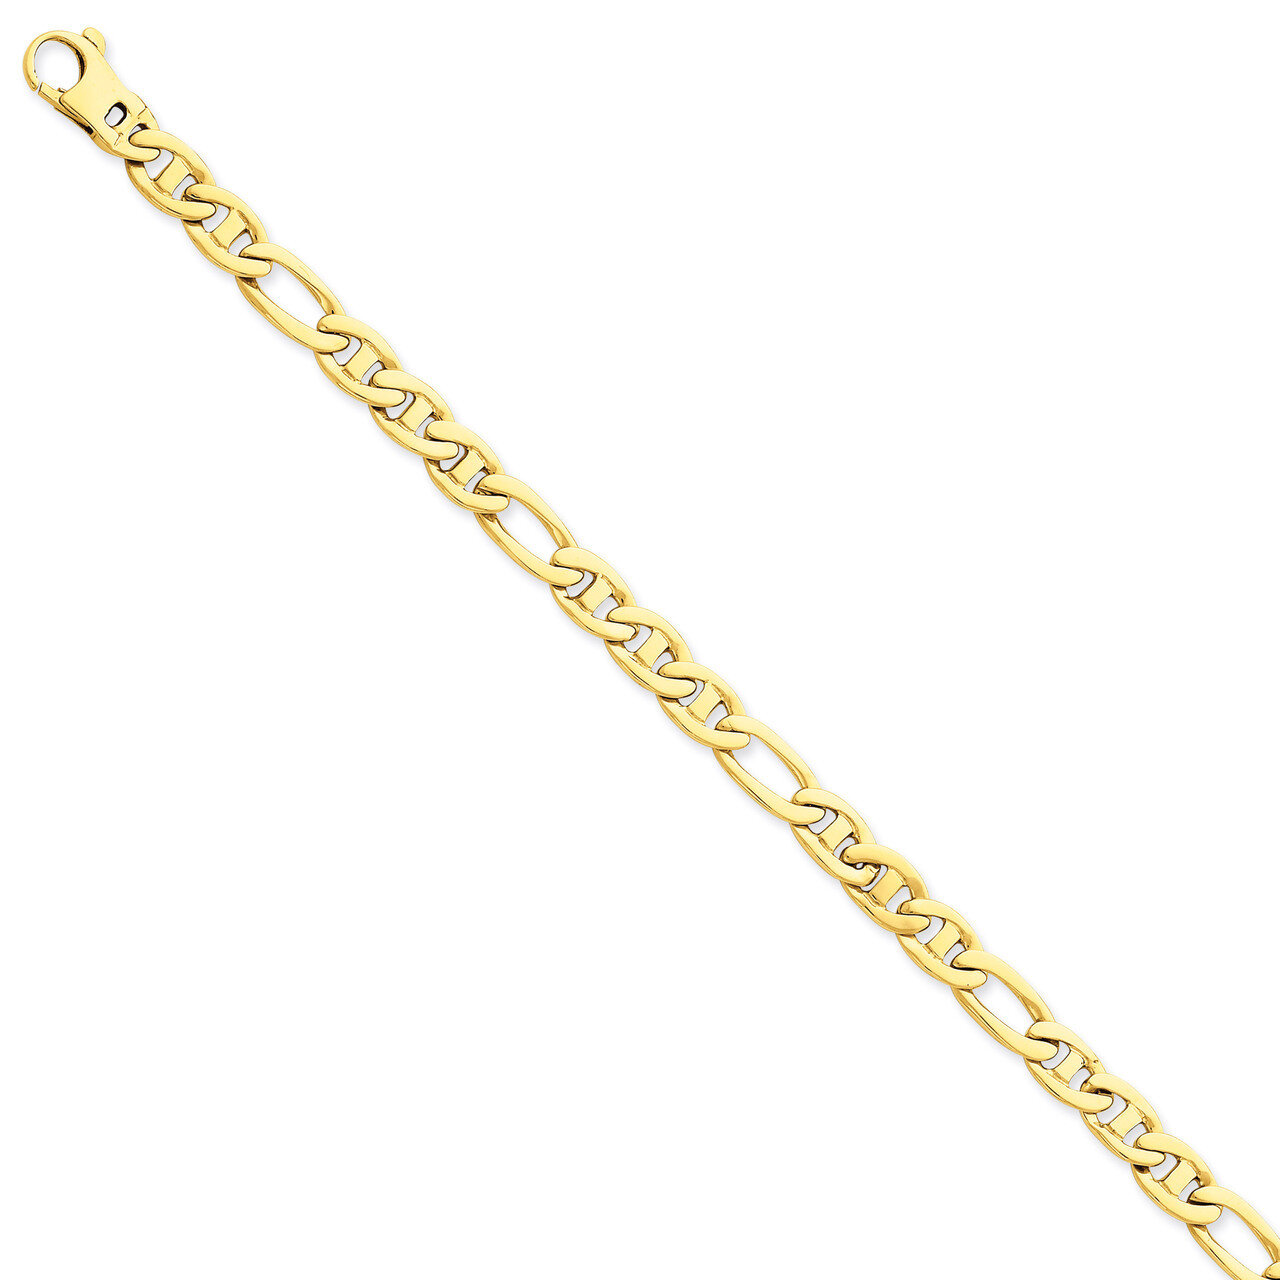 6.5mm Solid Hand-Polished 3 & 1 Flat Anchor Chain 20 Inch 14k Gold FL438-20